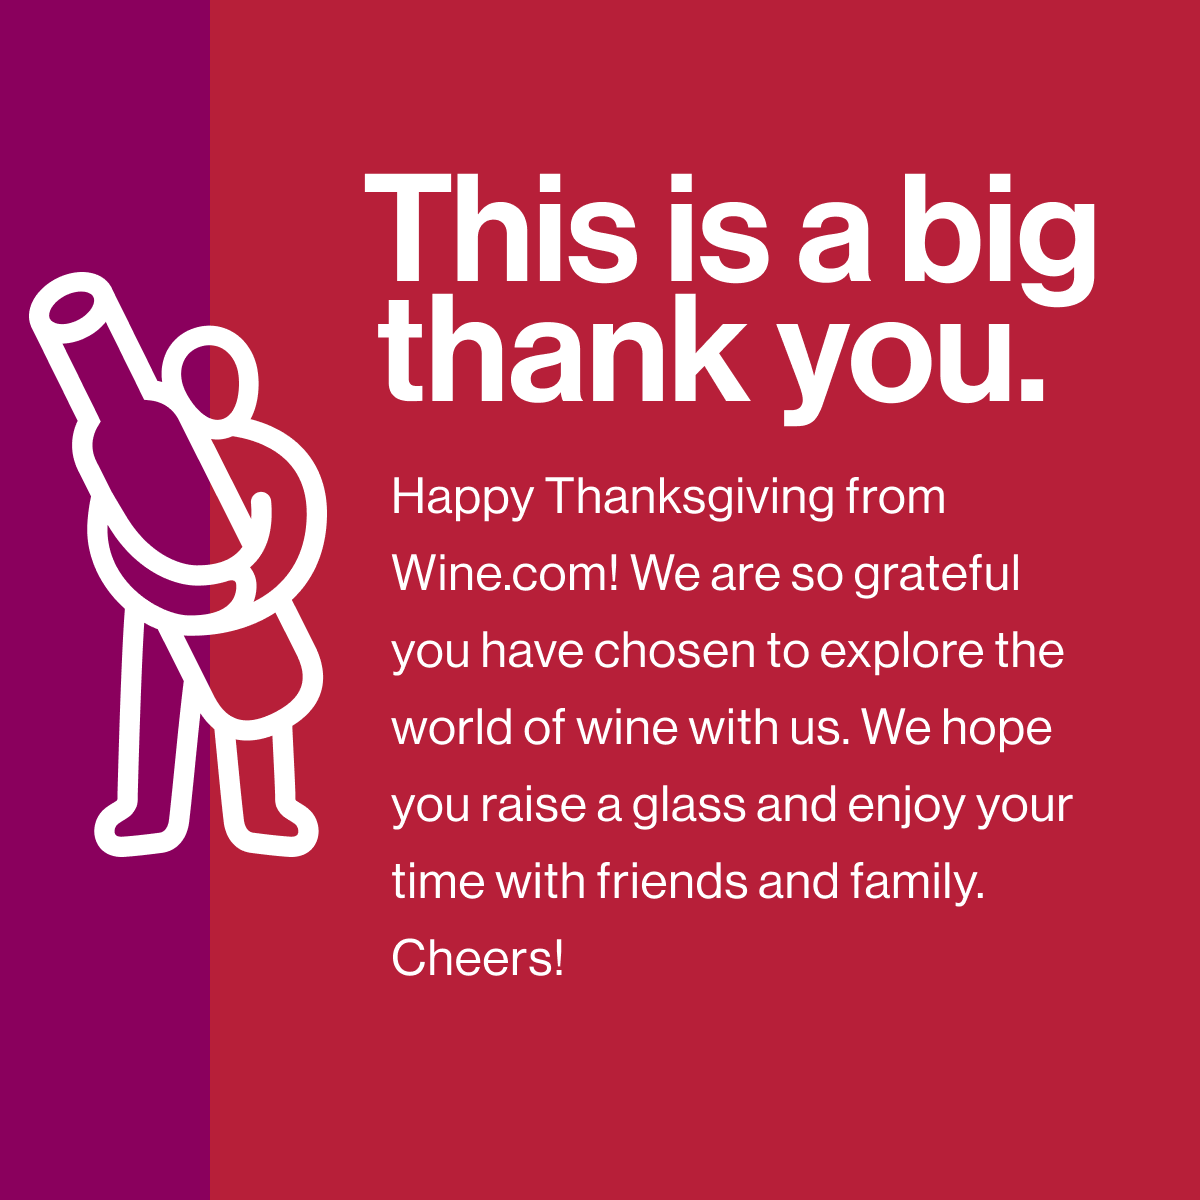 This is a big thank you. Happy Thanksgiving from Wine.com! We are so grateful you have chosen to explore the world of wine with us. We hope you raise a glass and enjoy your time with friends and family. Cheers!